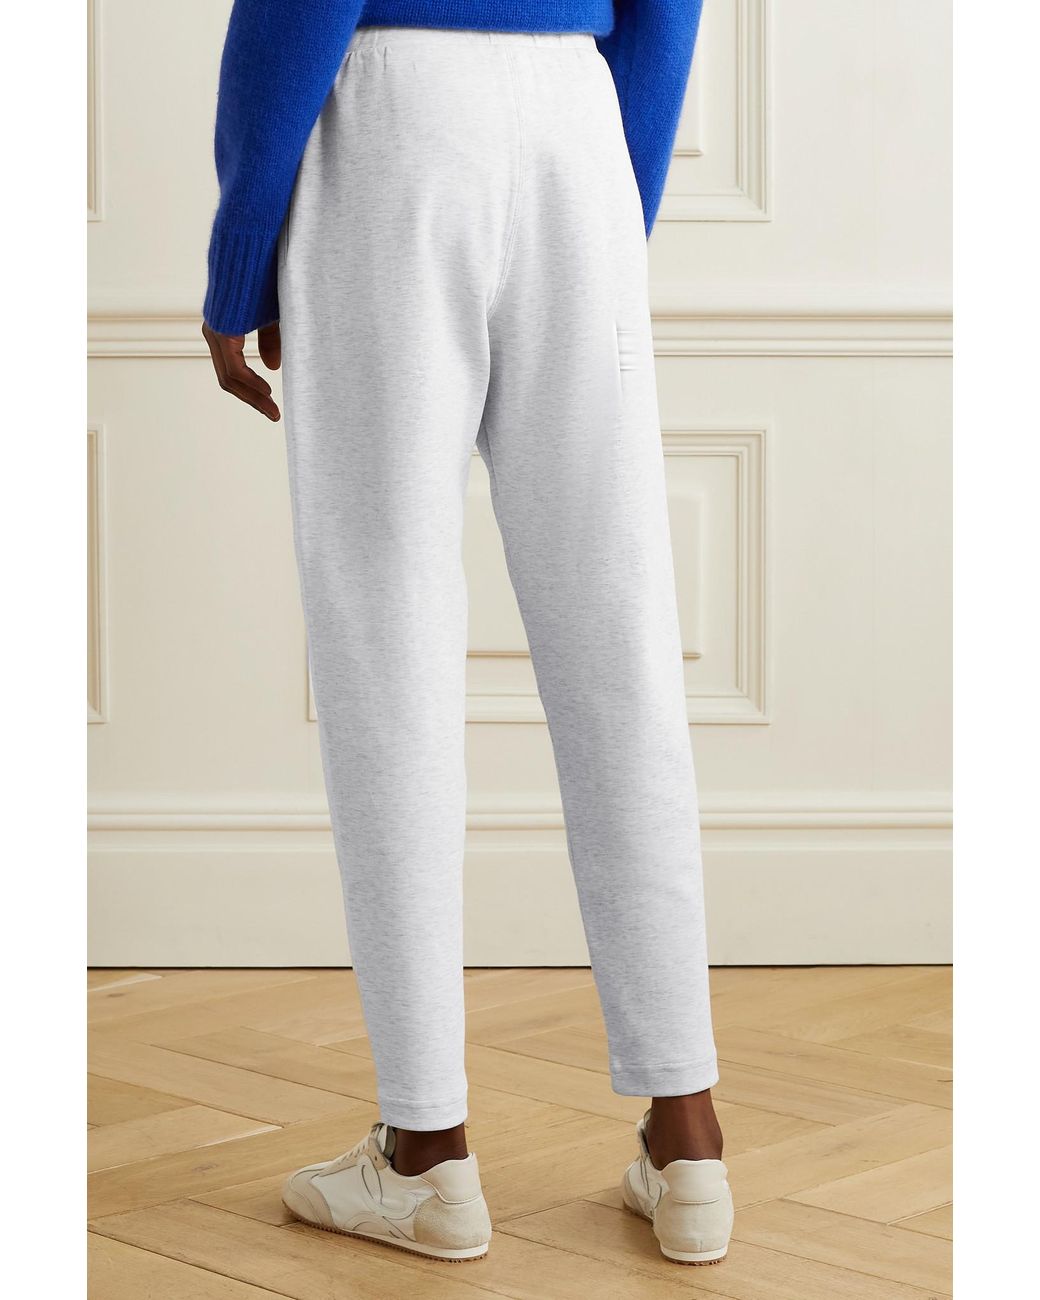 Max Mara + Leisure Pesca Cotton-blend Jersey Track Pants in Gray | Lyst